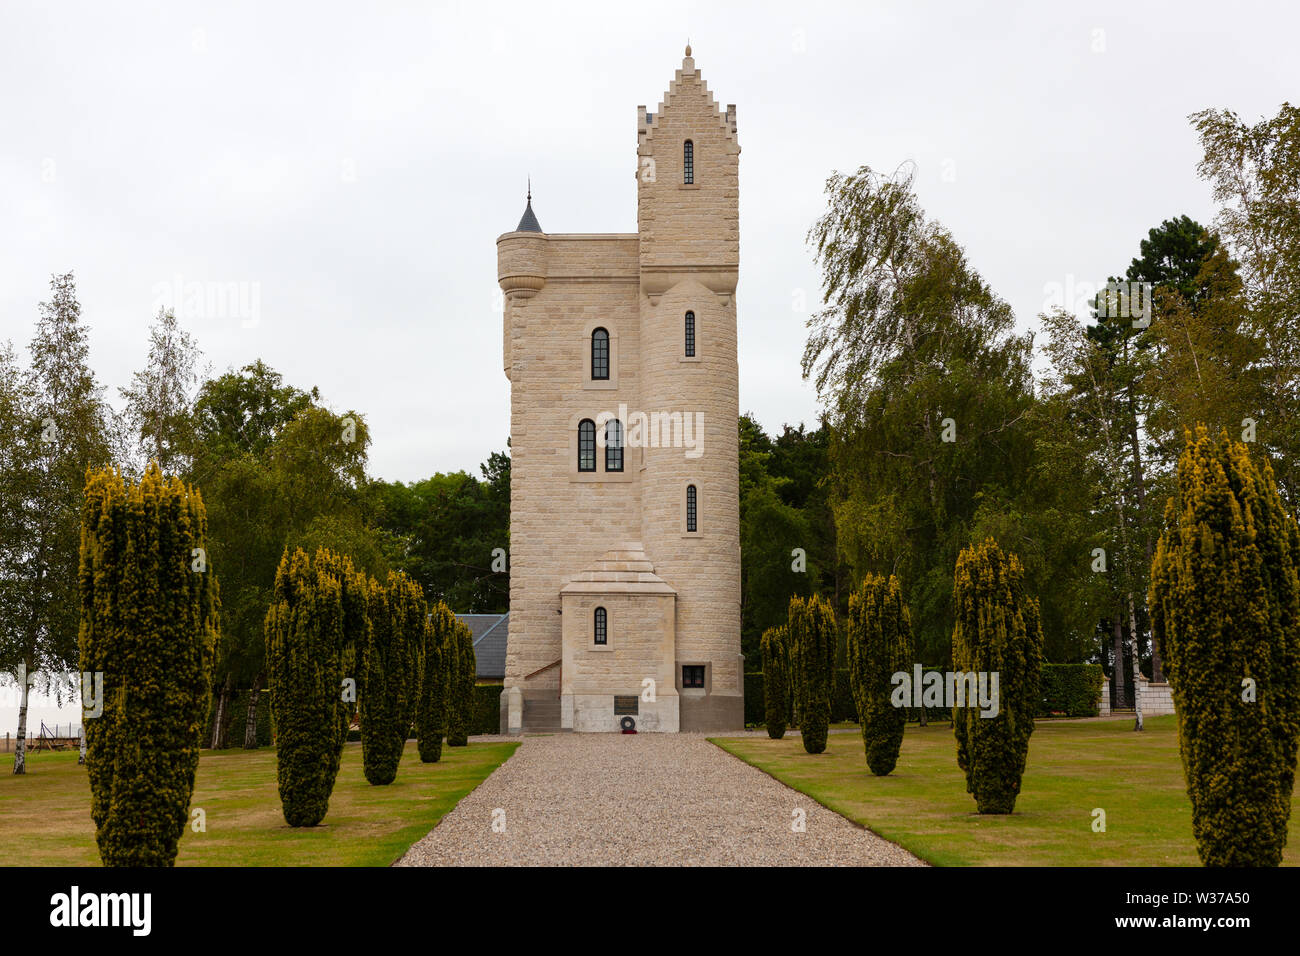 Ulster Tower, Thiepval, Somme, France. Northern Ireland's memorial to the men of the 36th (Ulster) Division from World War One. Stock Photo